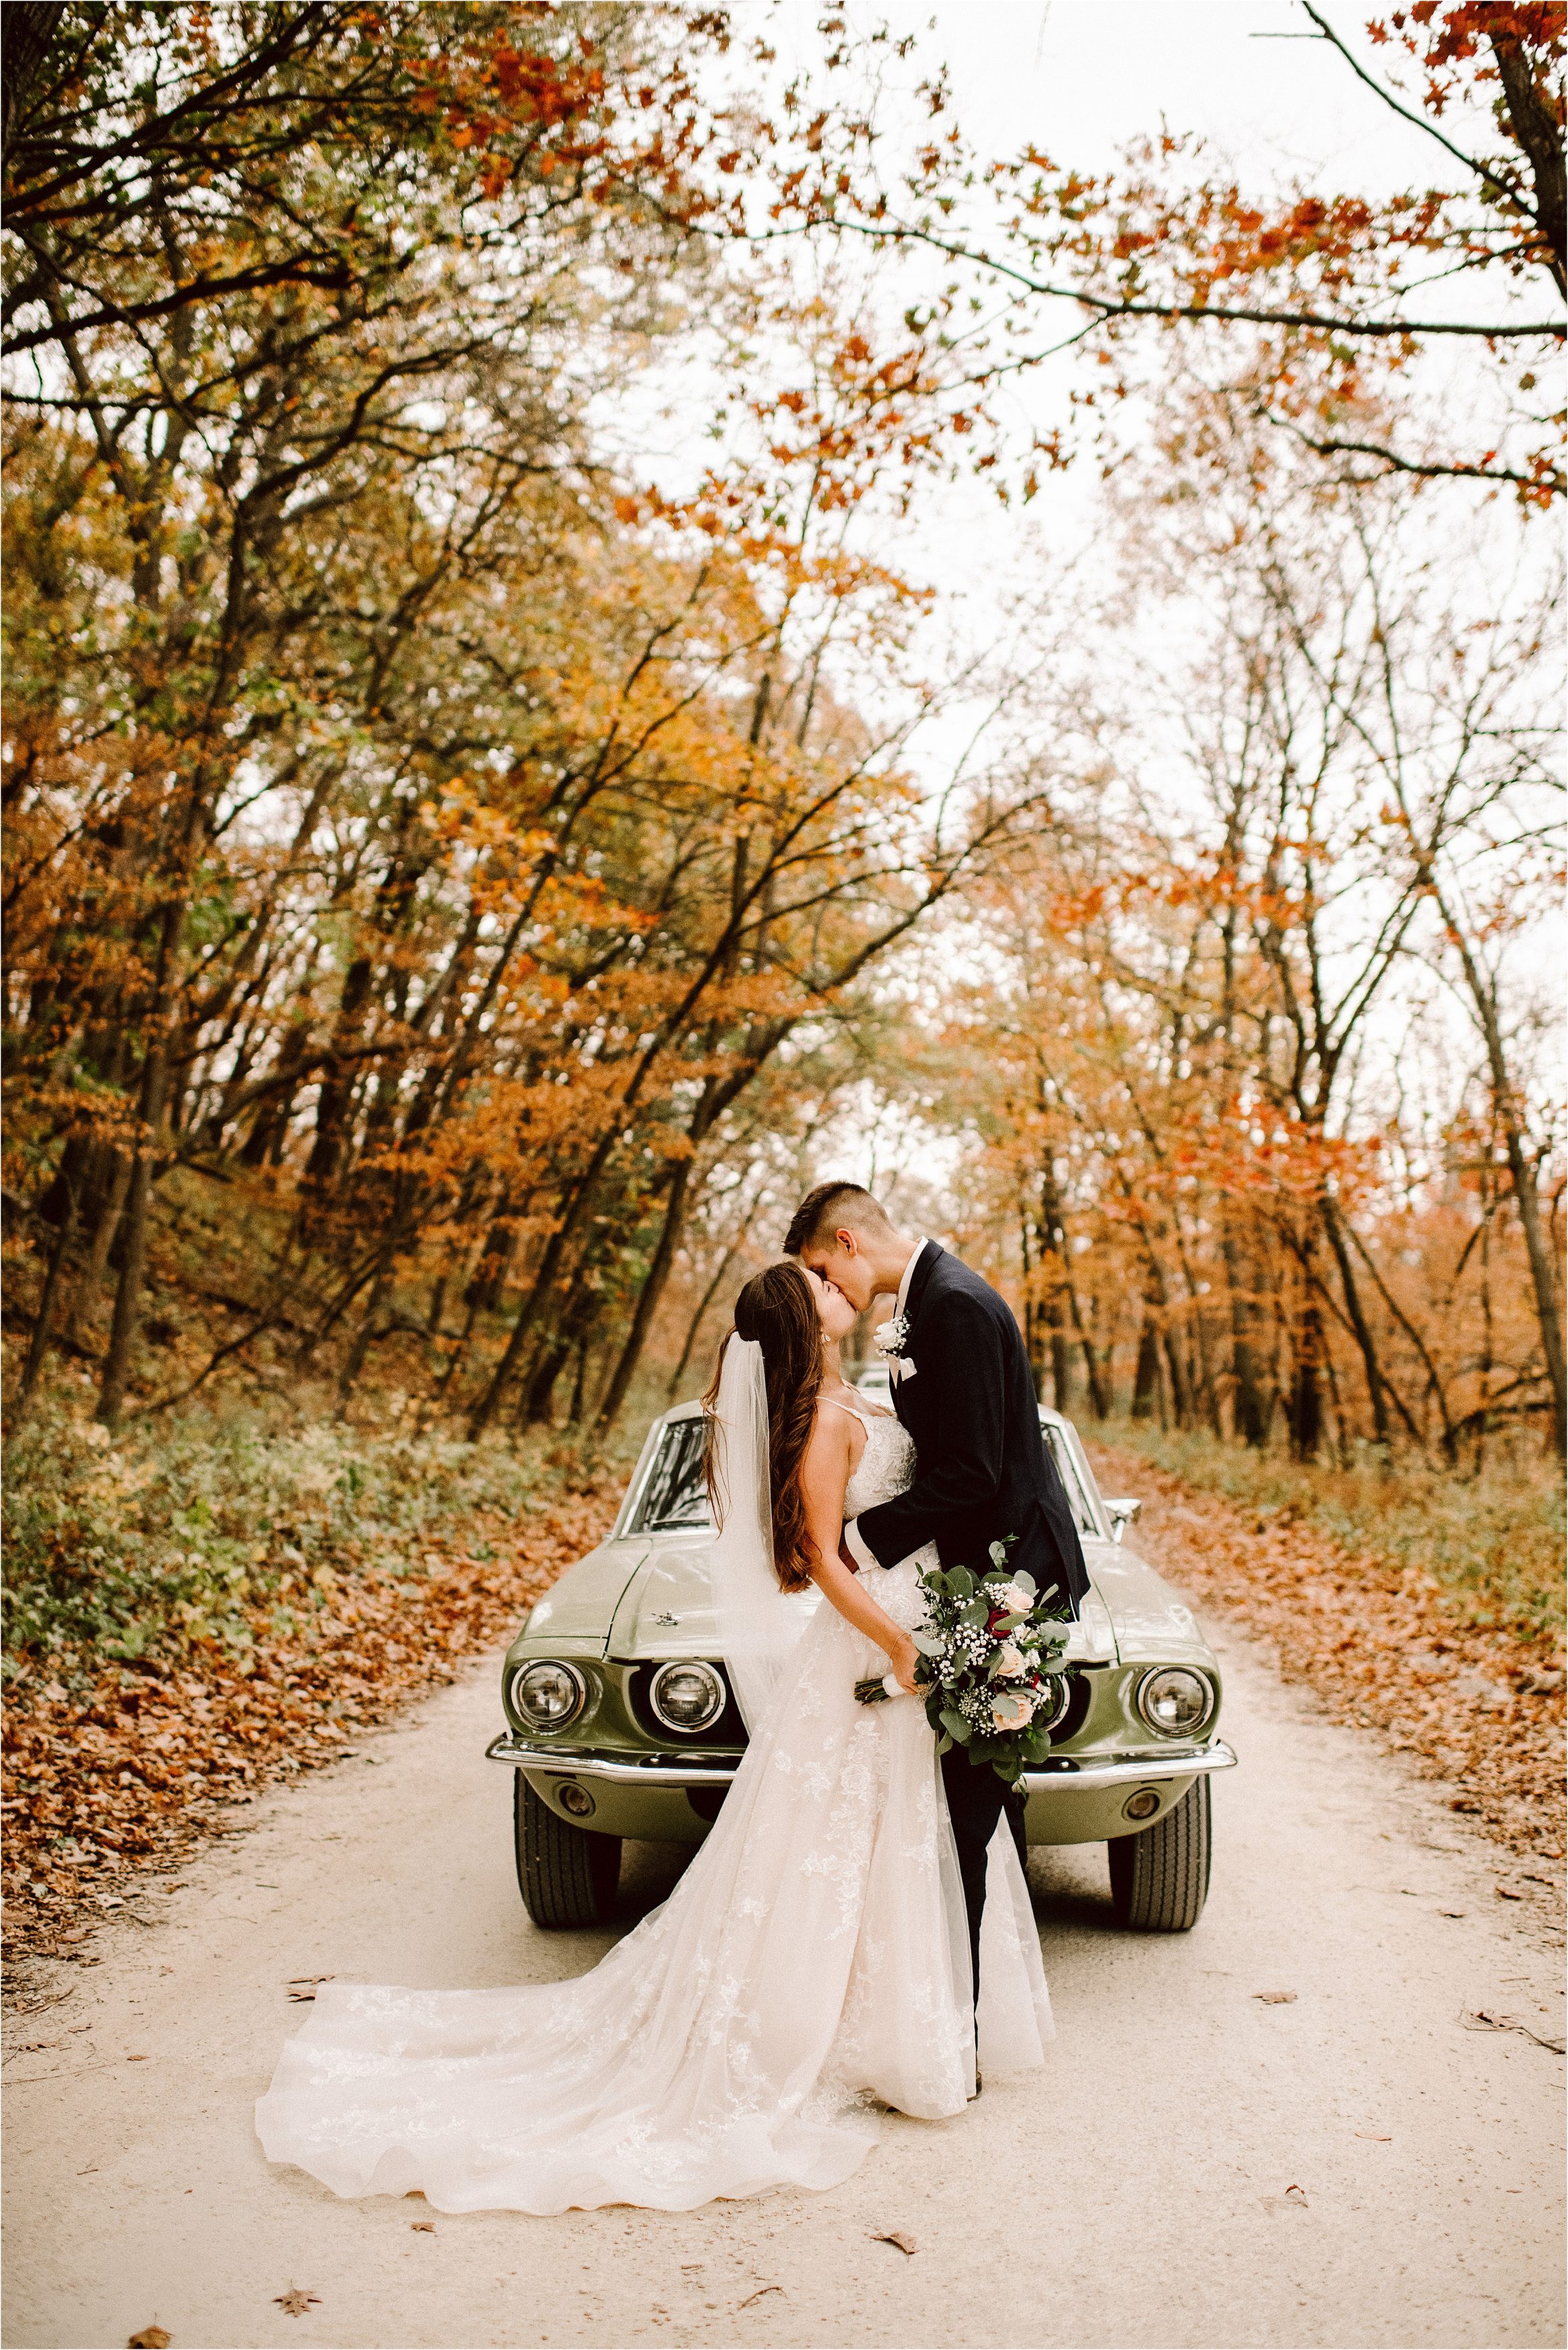 Vintage Car Wedding Photos Ford Mustang GT 500